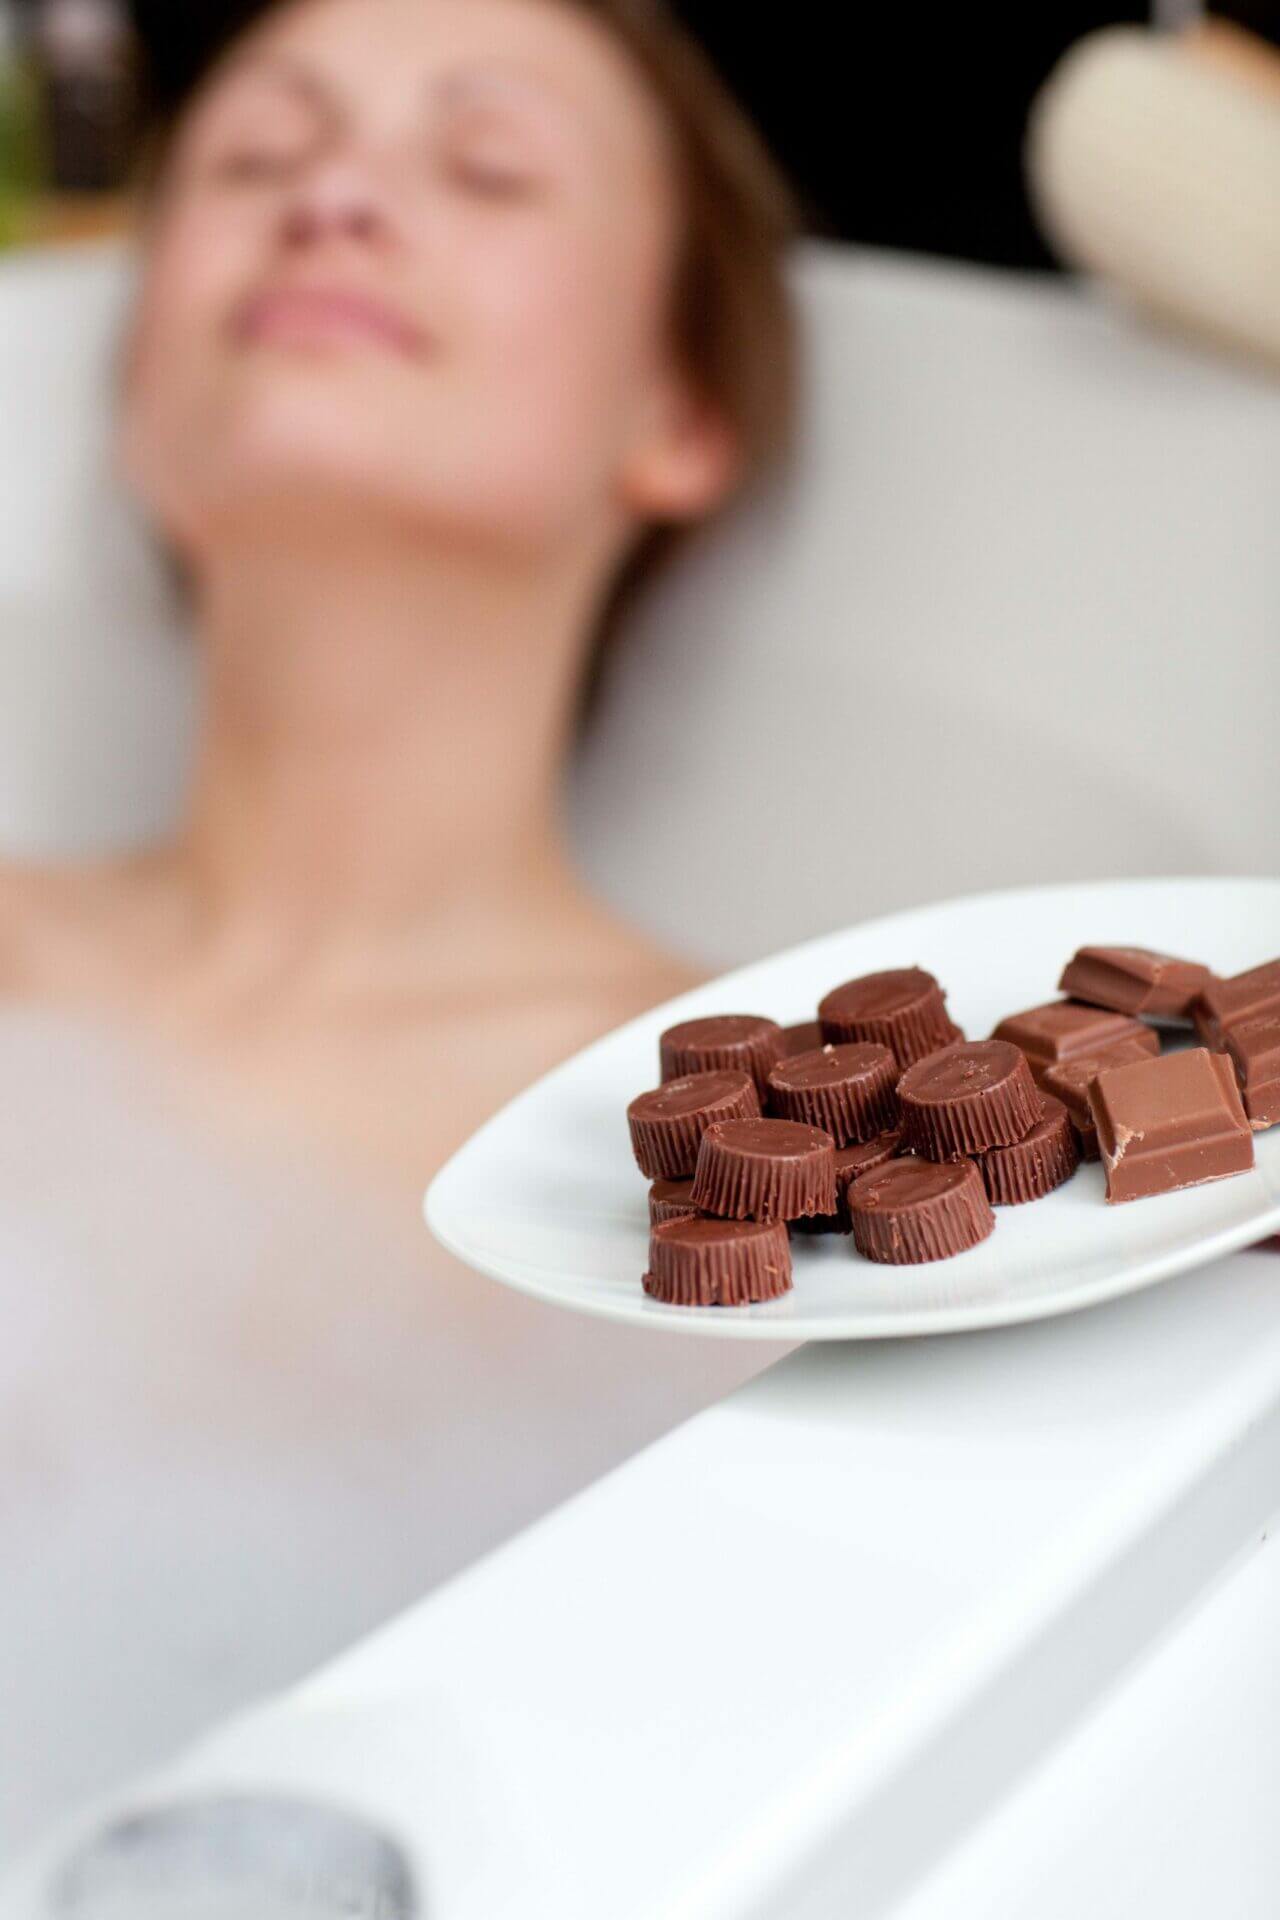 Top 11 Bubble Bath and Chocolate Pairing Guide